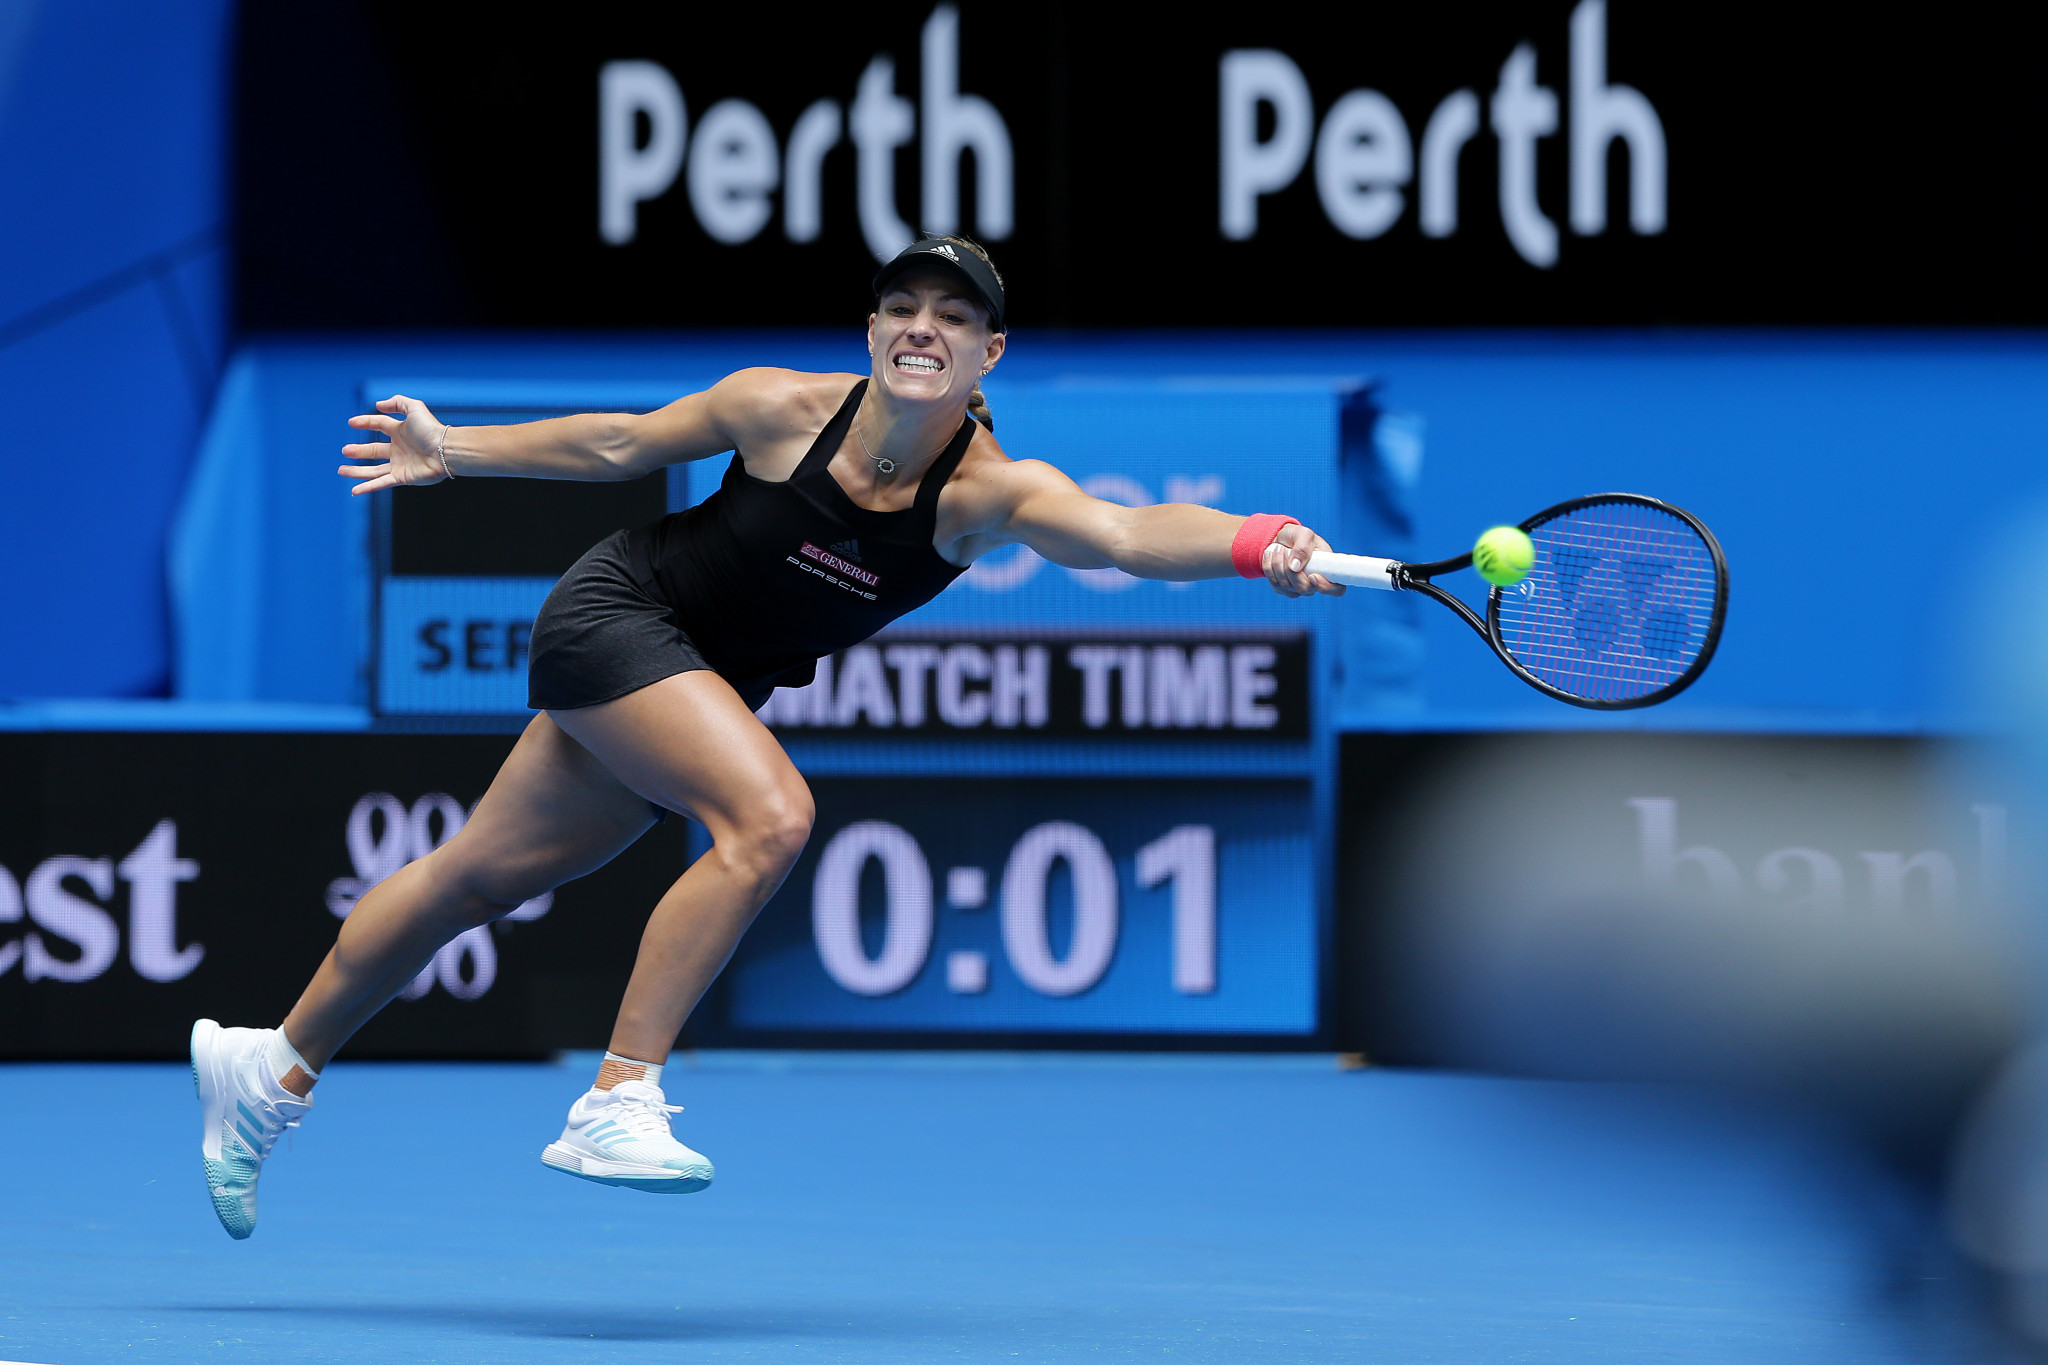 Angelique Kerber of Germany defeated Alize Cornet of France at the Hopman Cup in Perth ©Getty Images